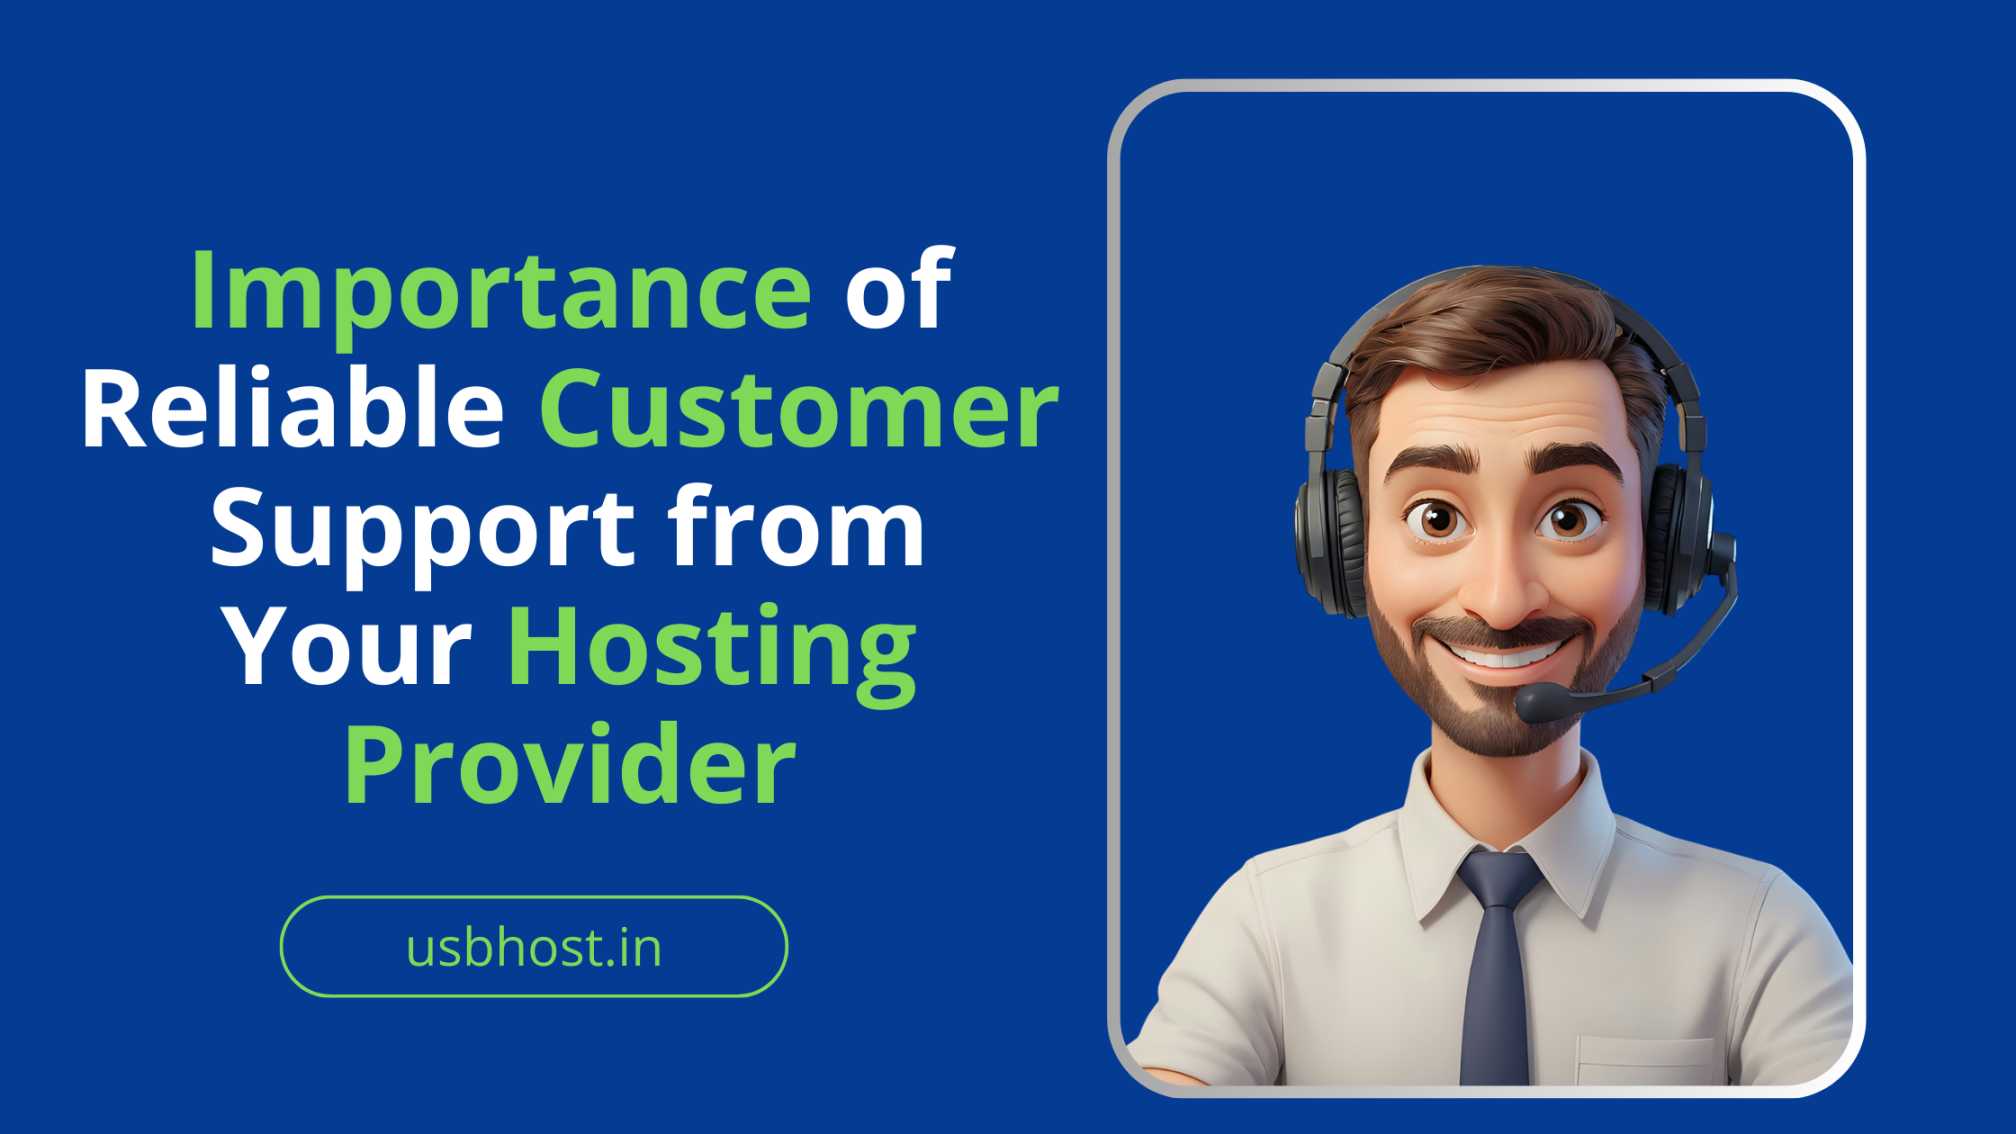 Importance-of-Reliable-Customer-Support-from-Your-Hosting-Provider